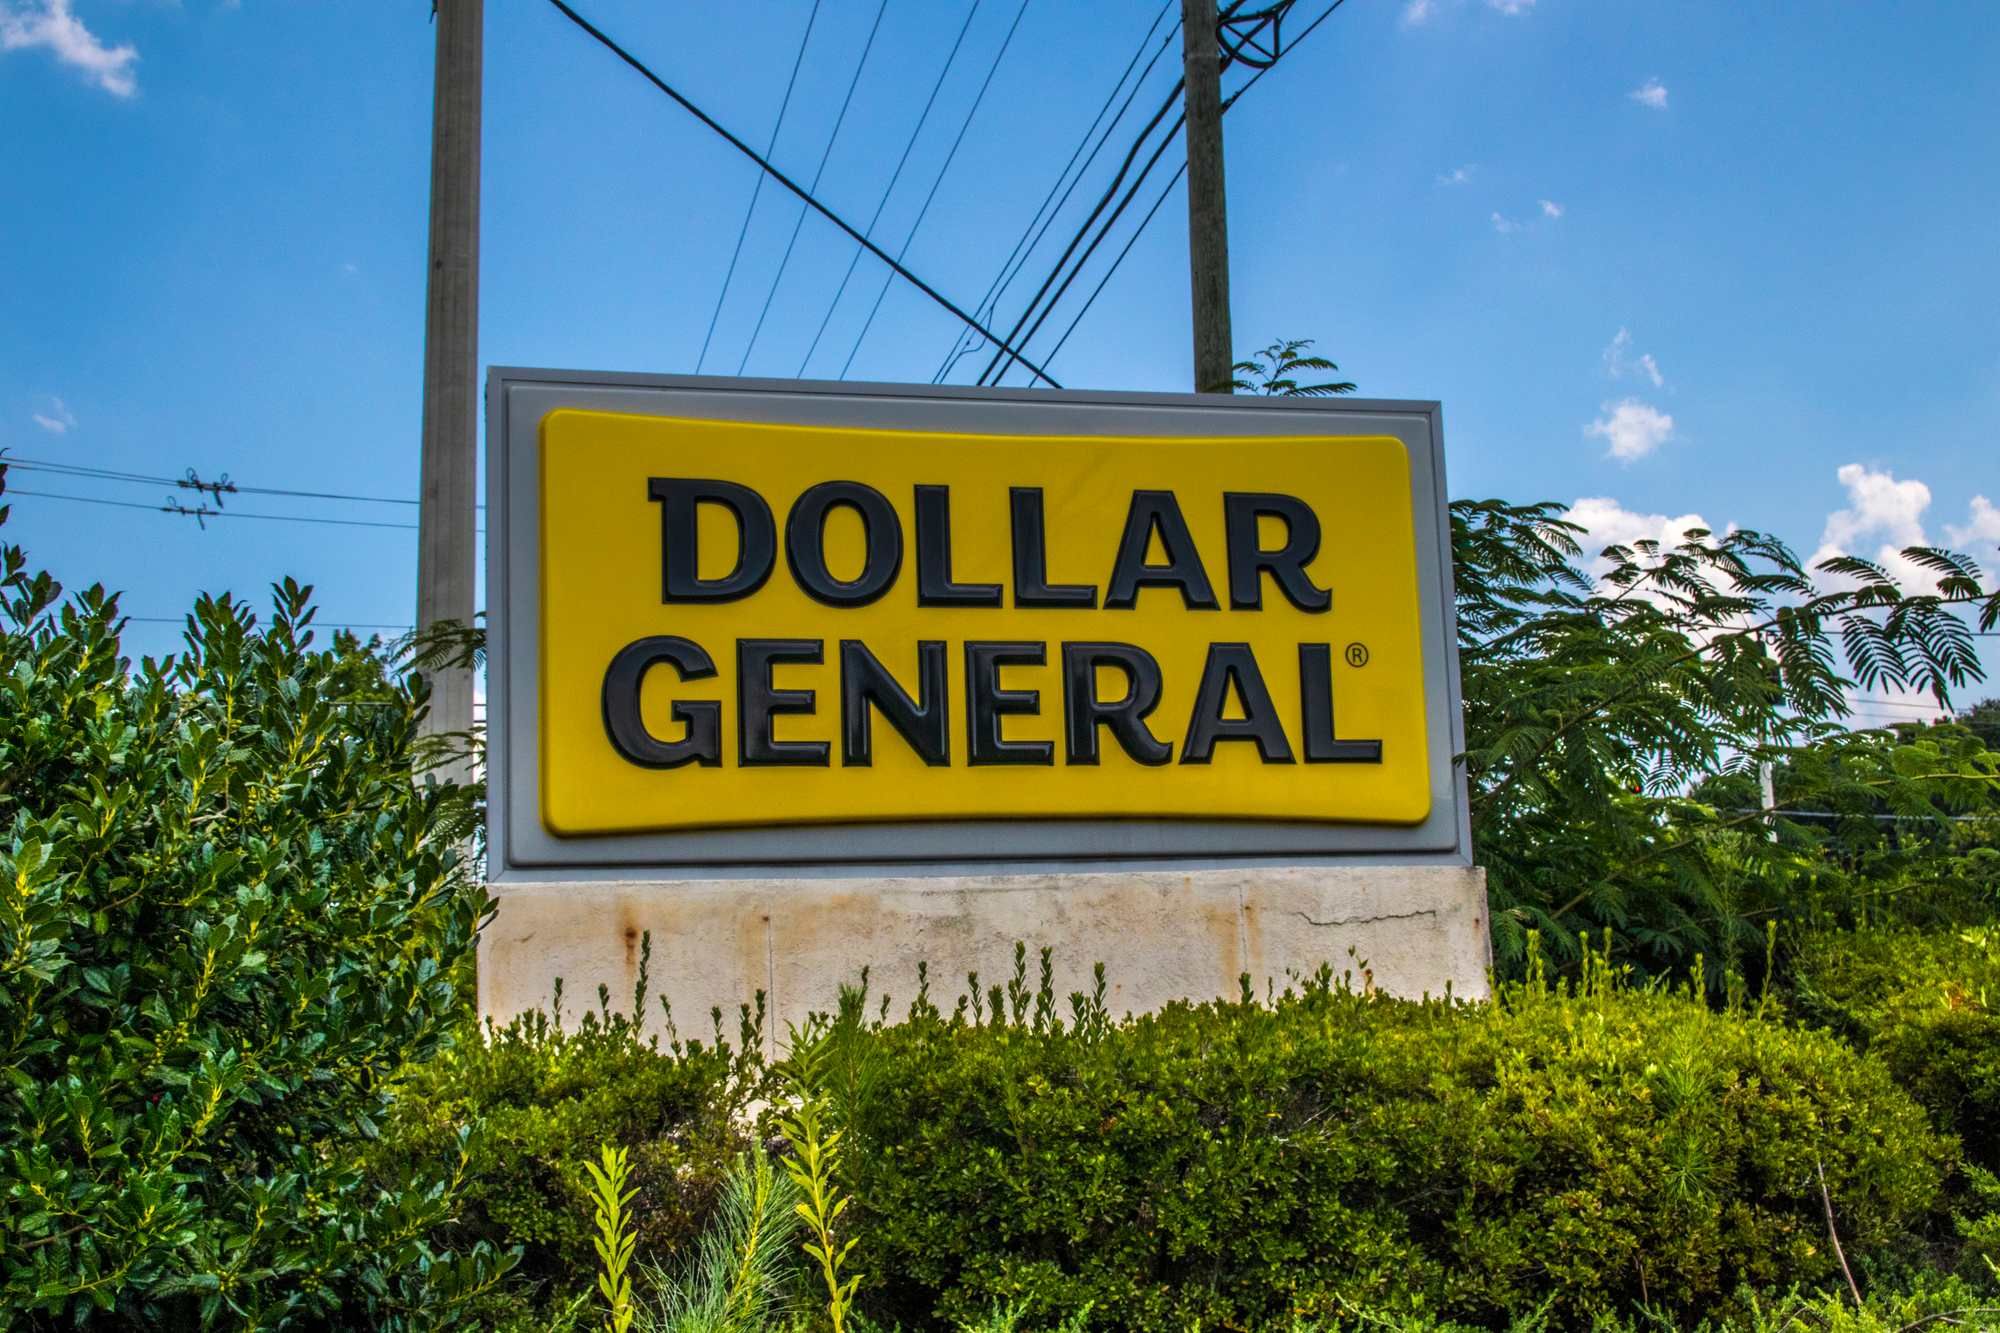 Dollar General Agrees to Pay 1.8M to Settle Infant Pain Reliever Class